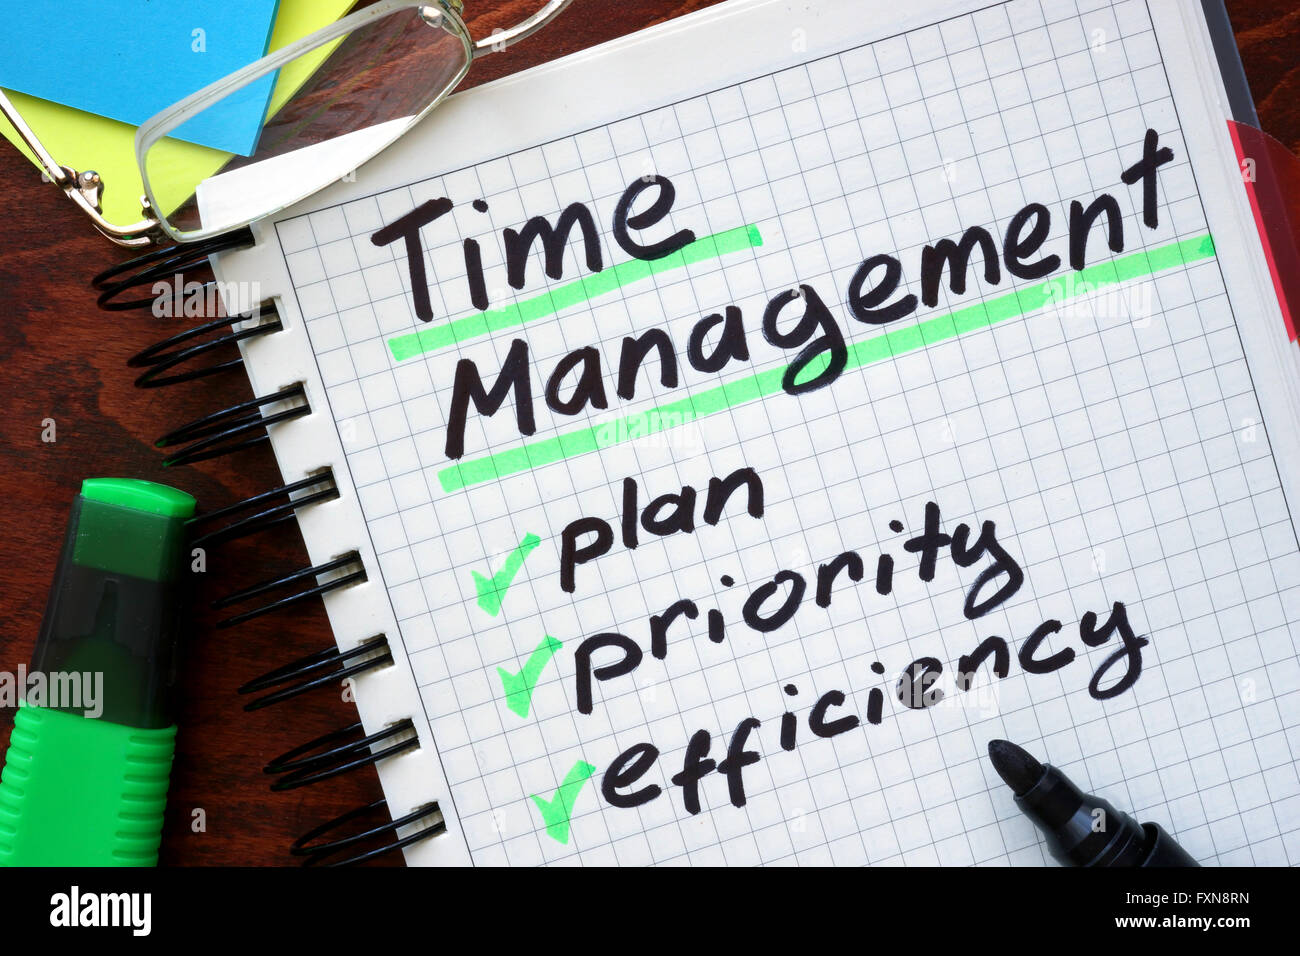 Time Management written on a tablet. Business concept. Stock Photo